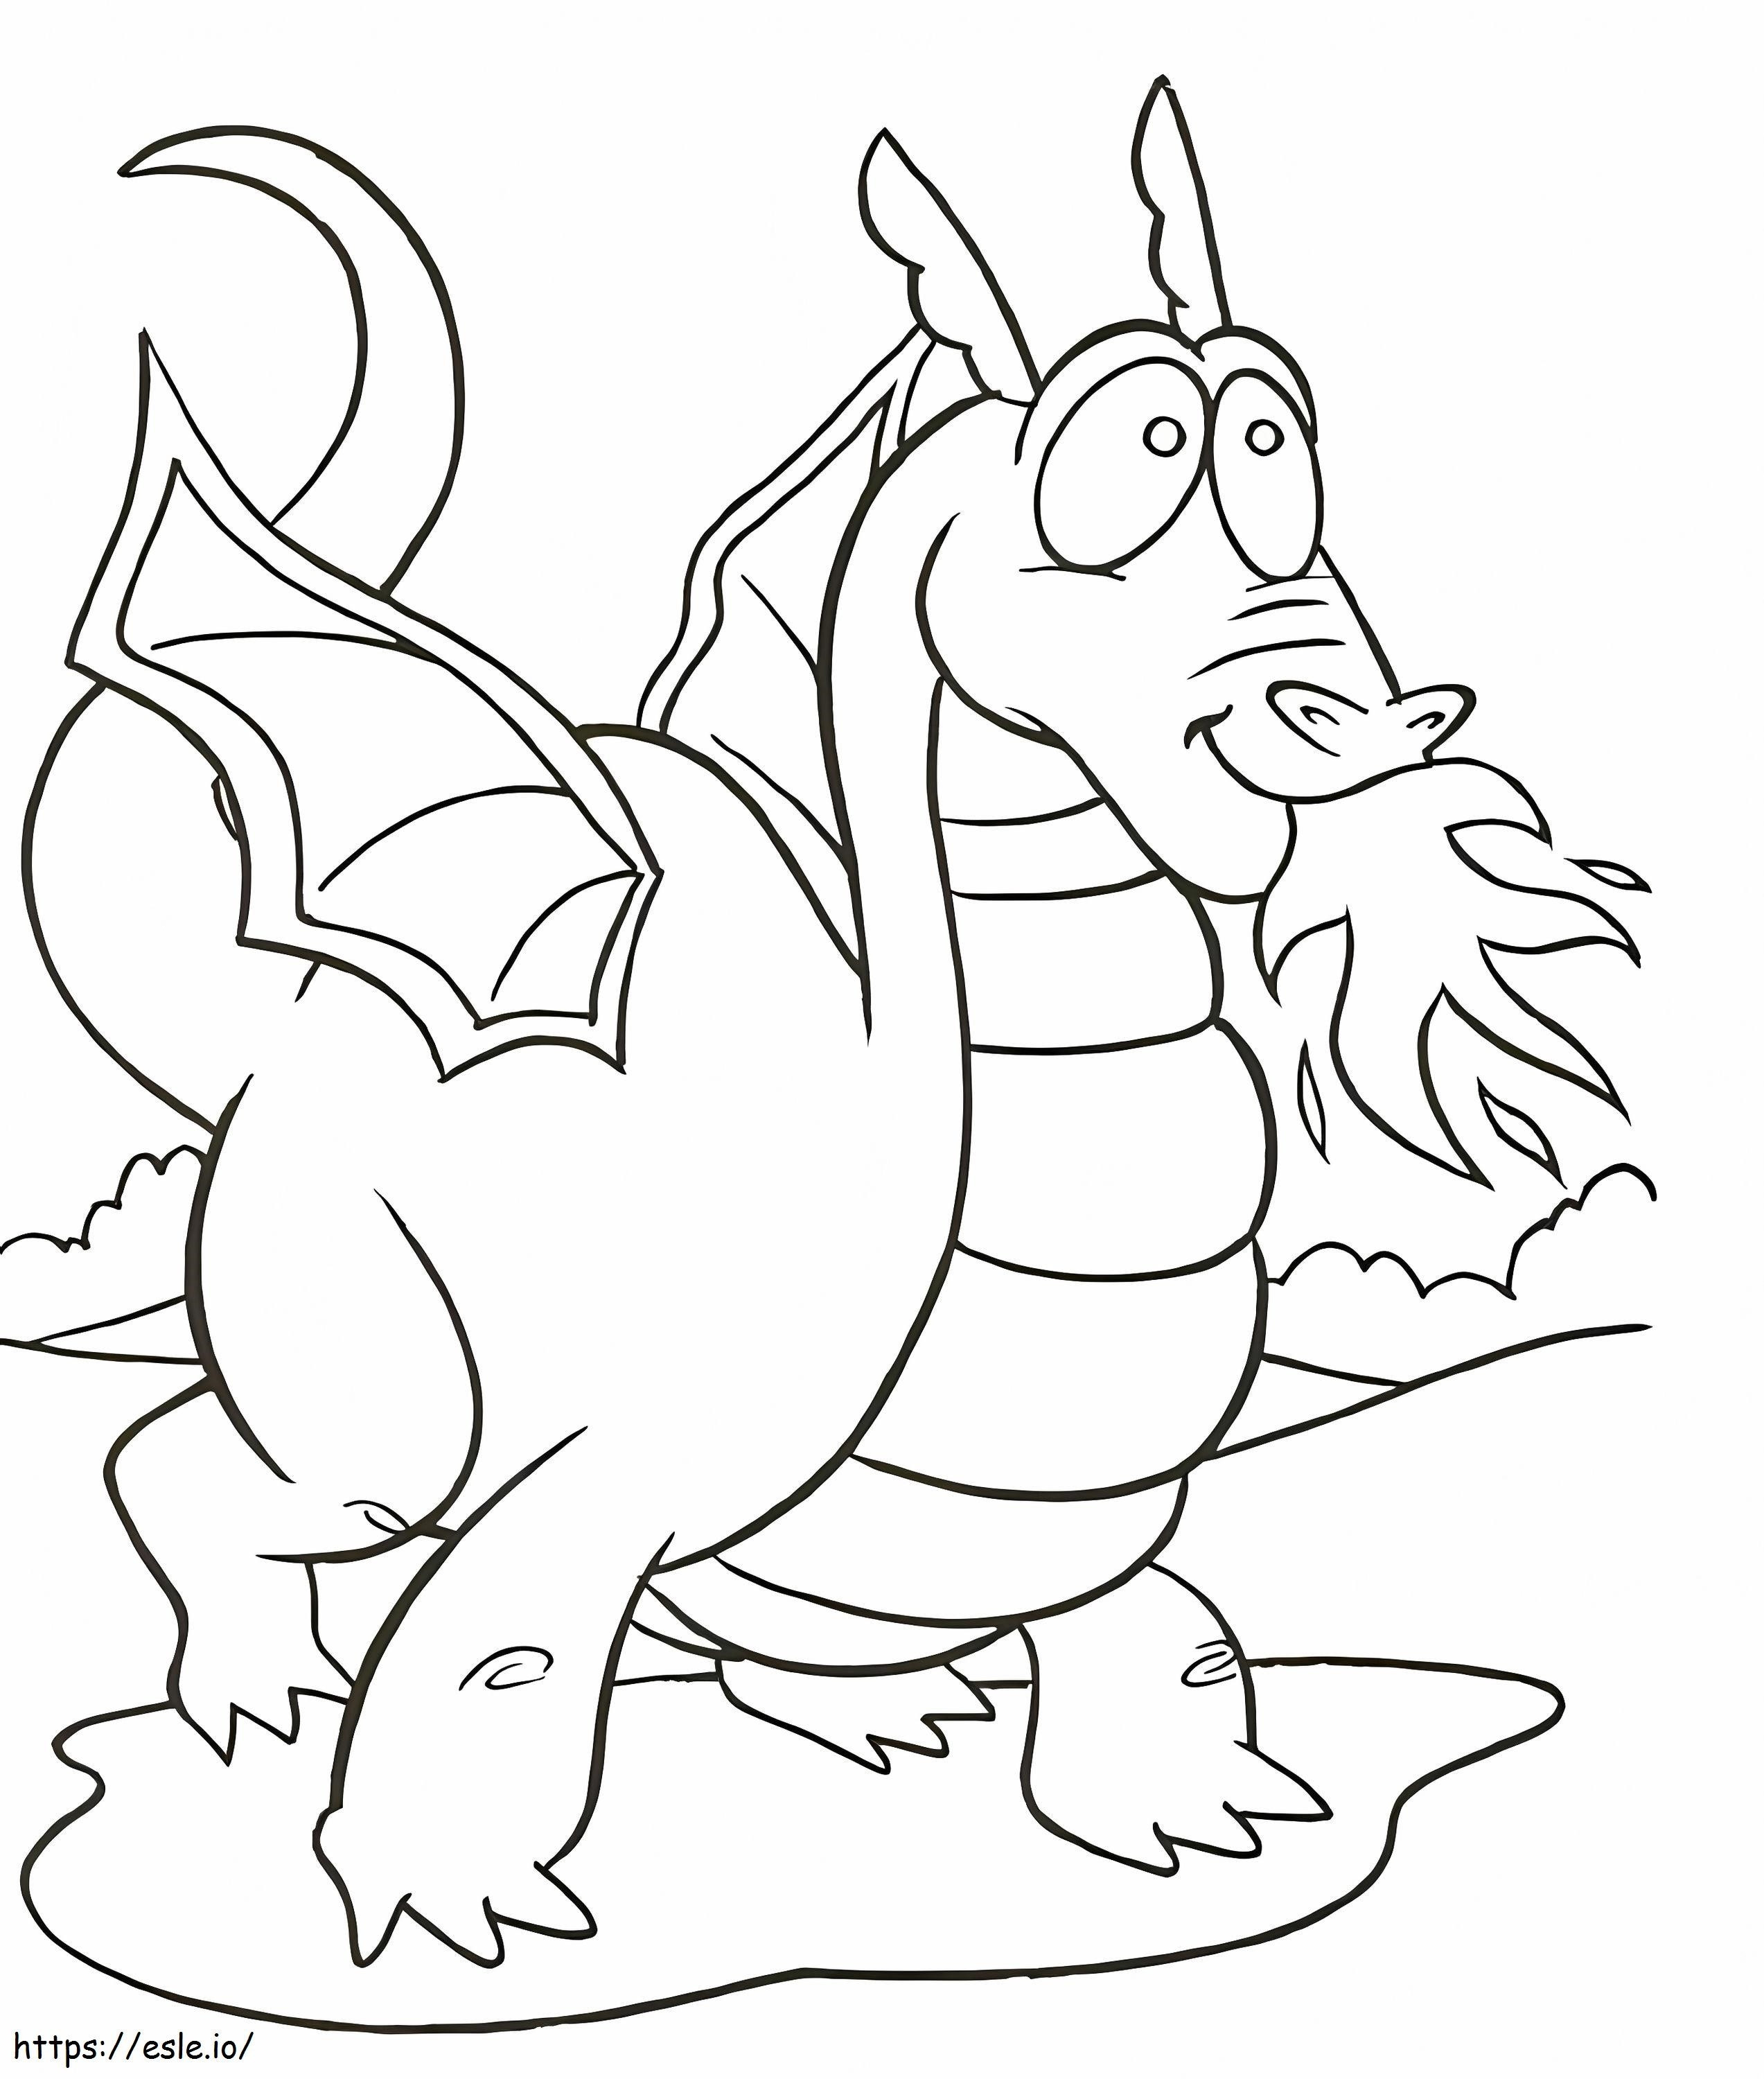 Funny Fire Dragon coloring page